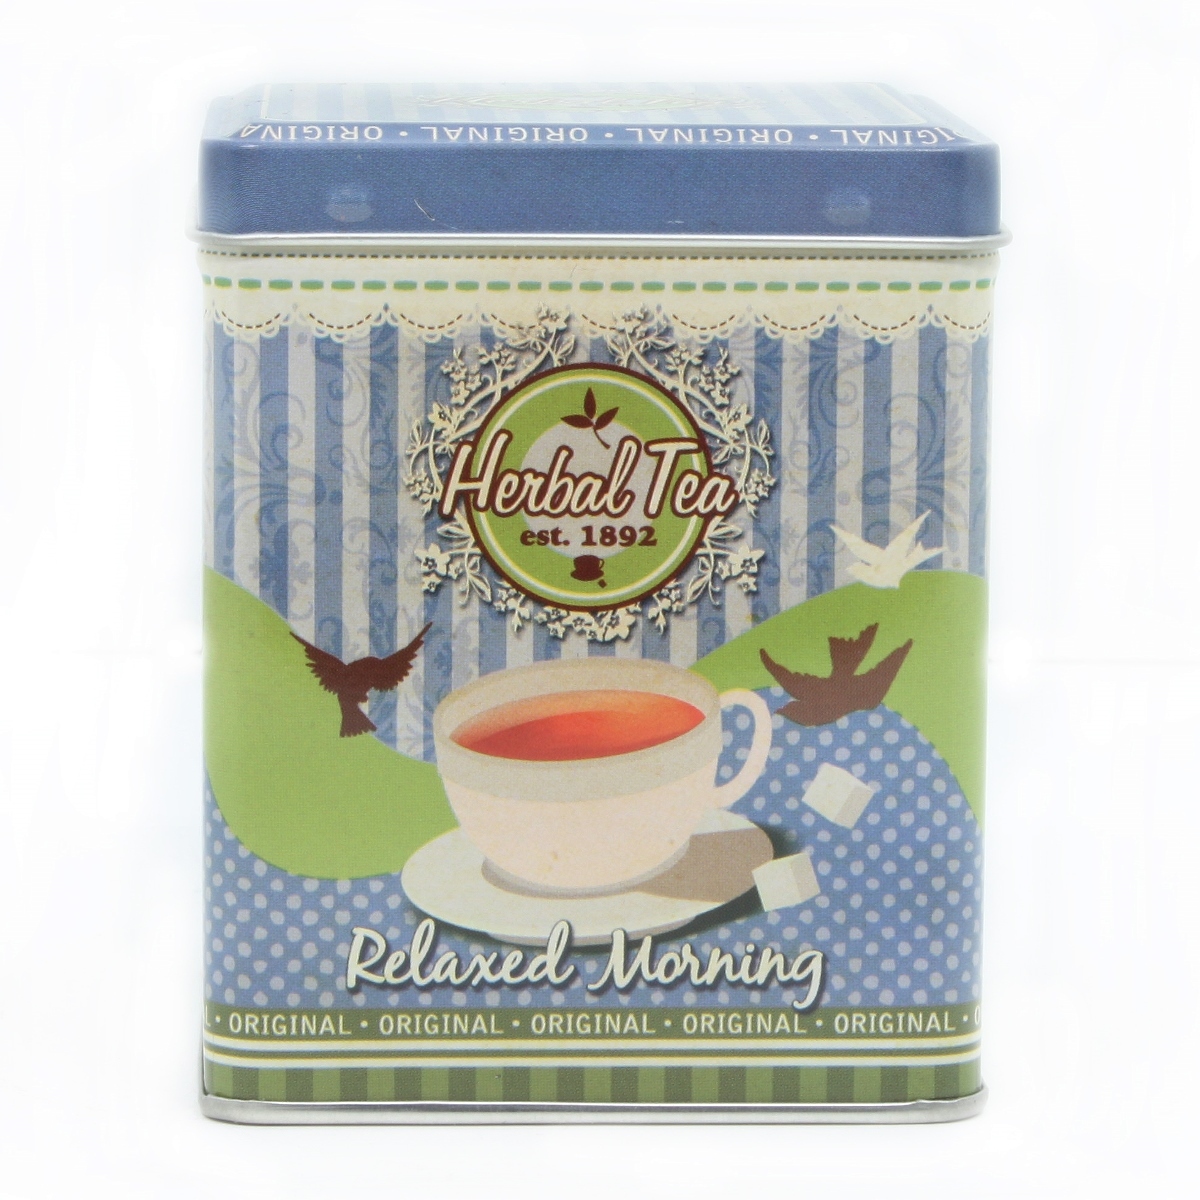 Cutie metalica - Relaxed Morning medie | Kirchner, Fischer & Co